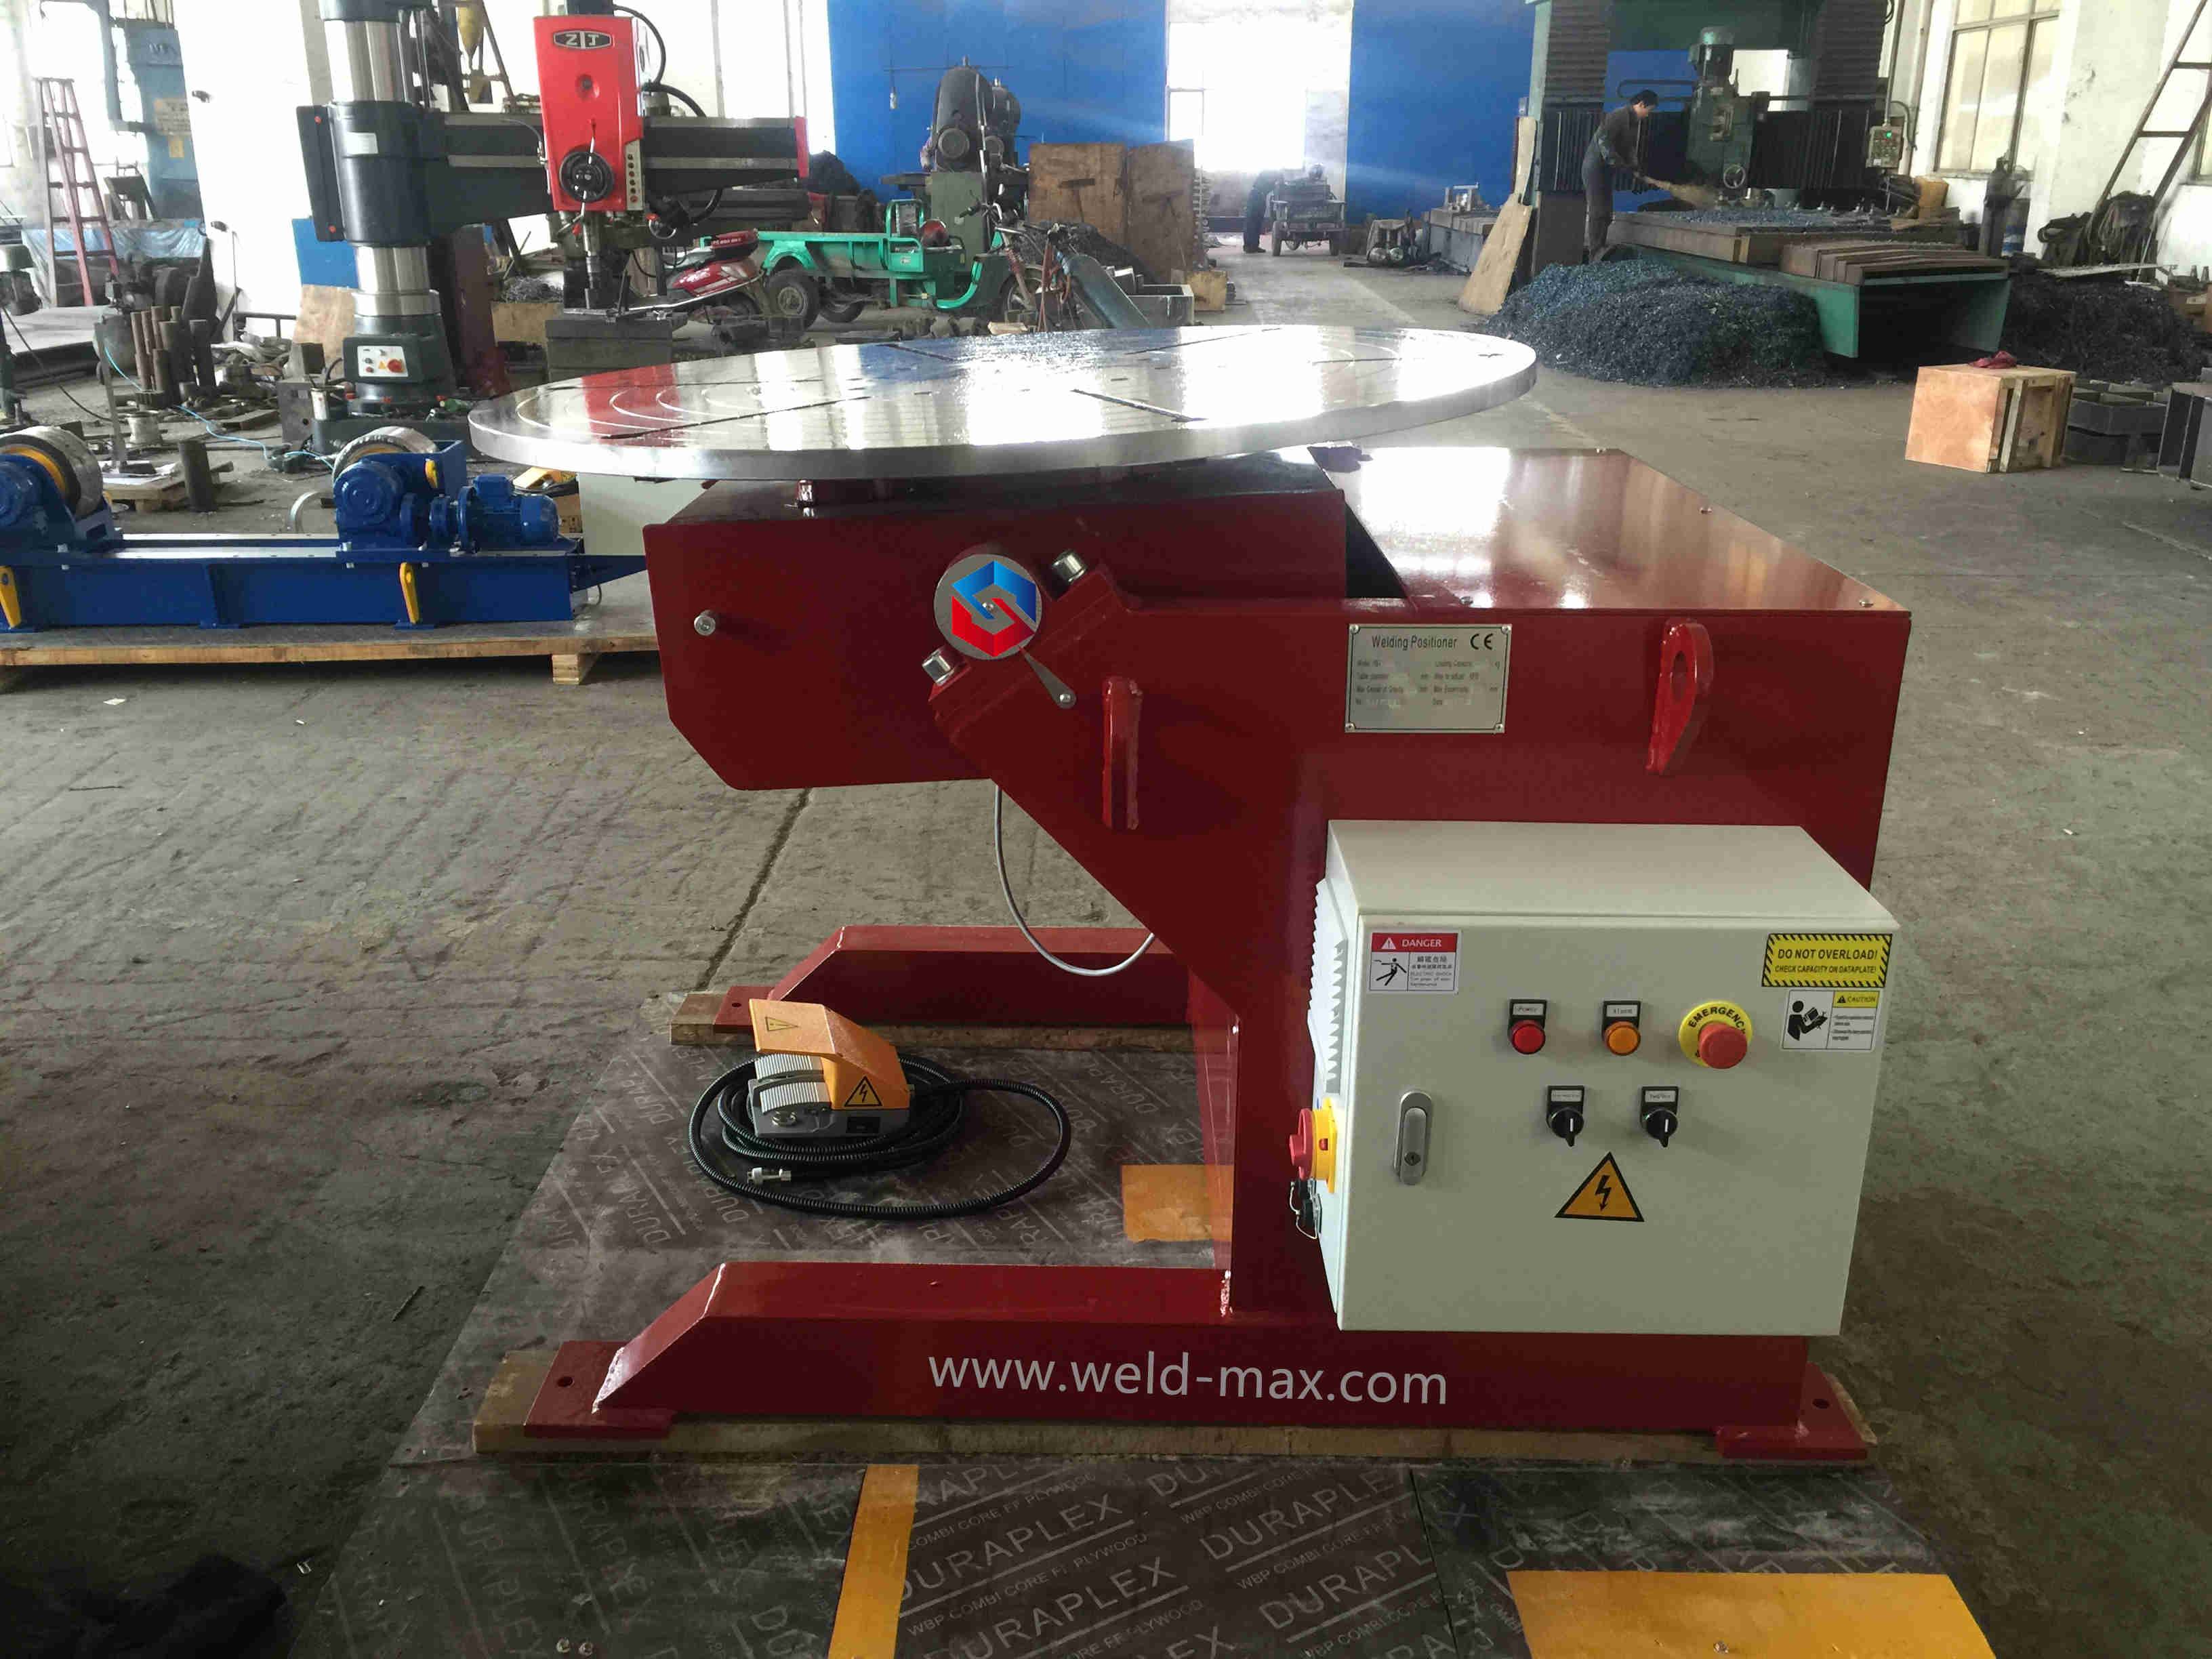 factory Outlets for Metal Wheels Channeling Welding Rotators - HBJ-40 Red Fixed Welding Positioner With Horizontal Turning Table And 5 JAWS Chuck – Sanlian